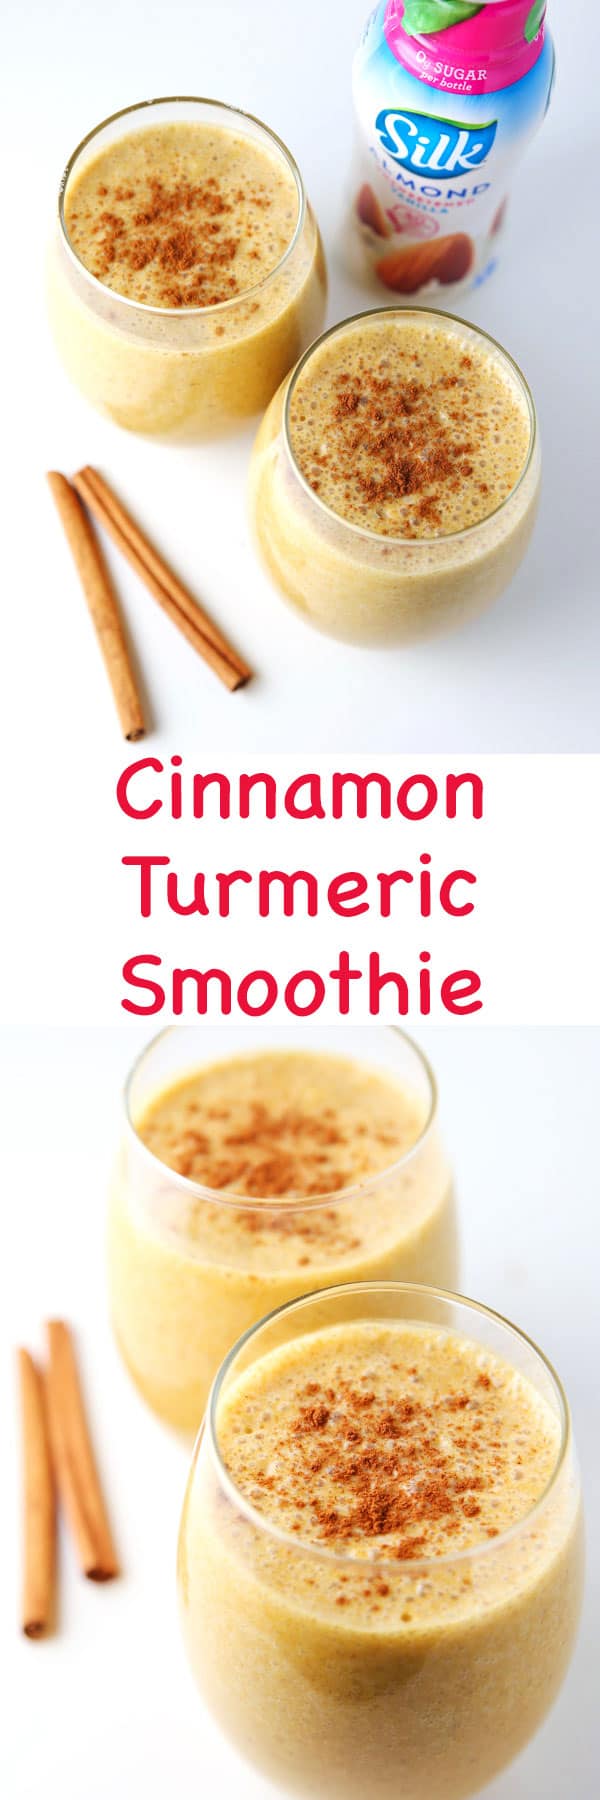 #ad This Cinnamon Turmeric Smoothie is so creamy and delicious! We made this dairy free in partnership with @Silk @LoveMySilk #PlantBasedGoodness #CollectiveBias